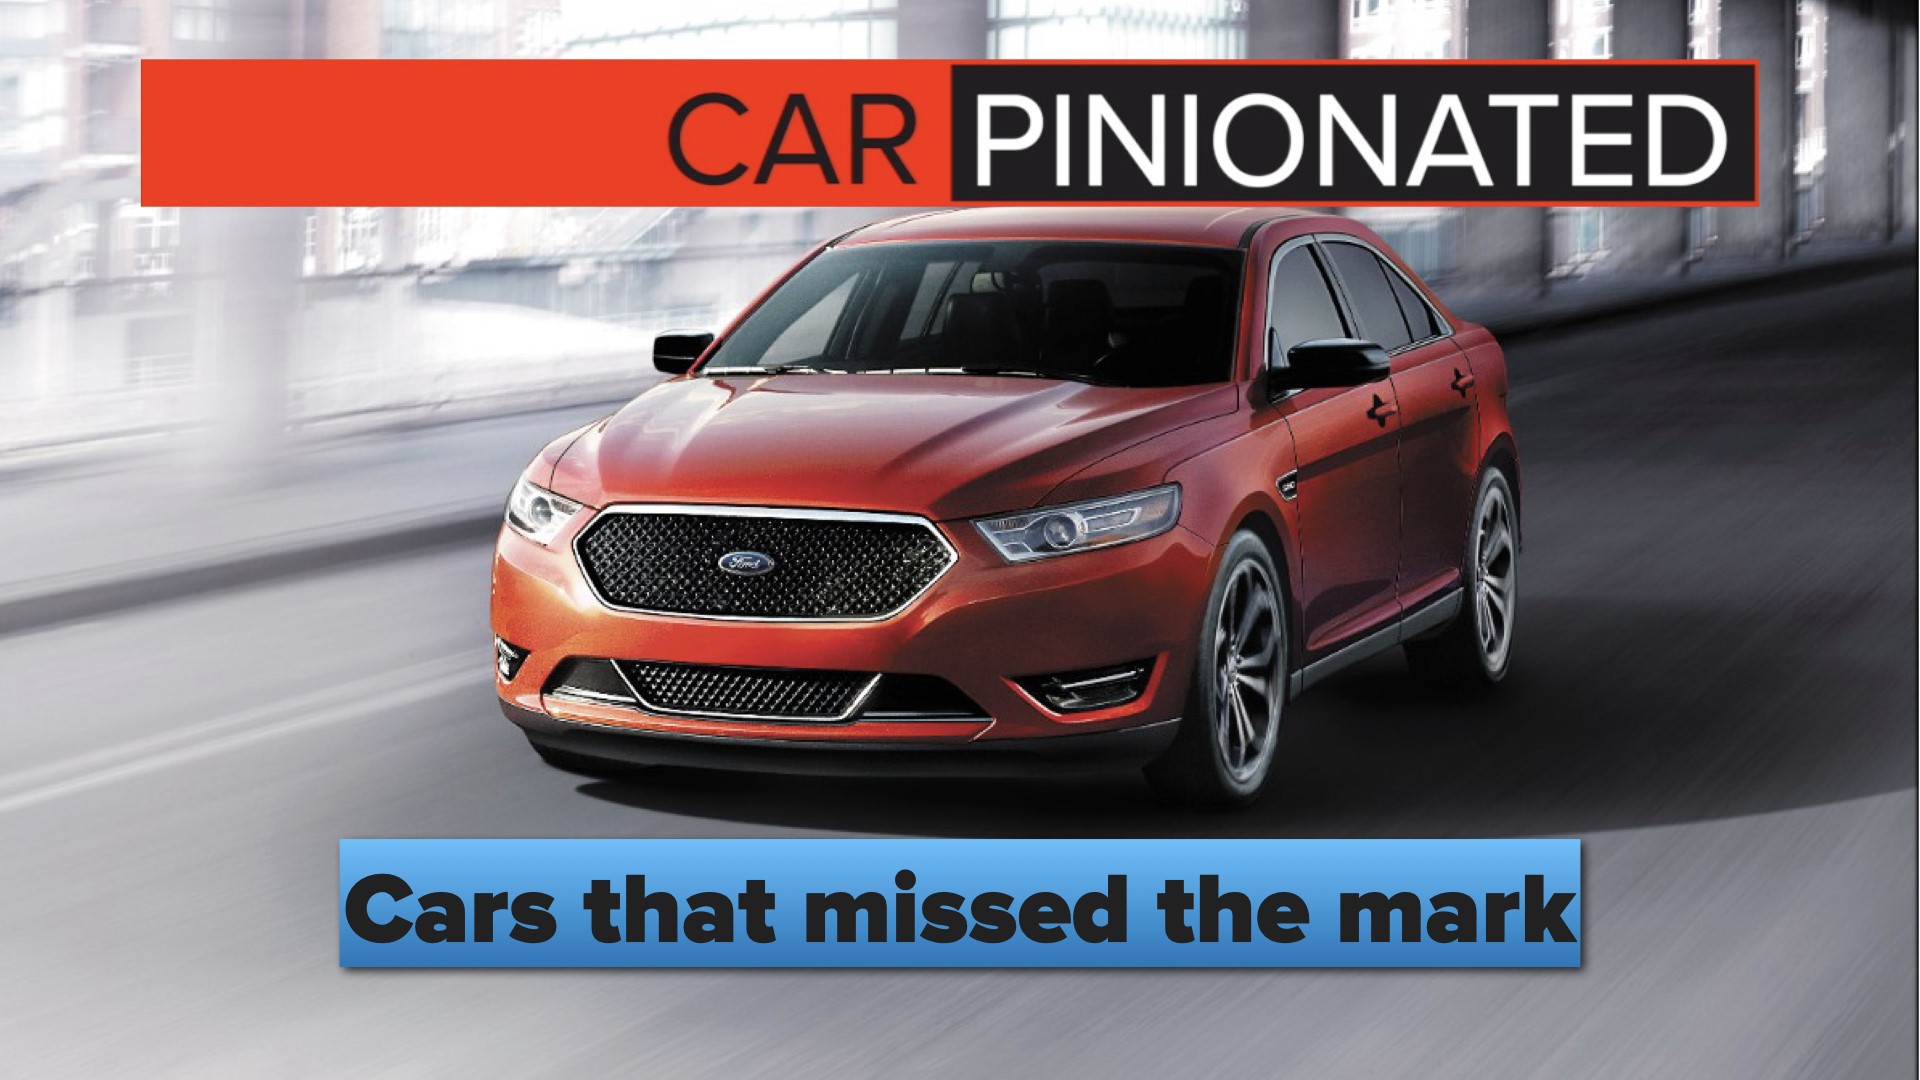 There's anticipation when a new model is announced, and sometimes the new vehicle misses the mark. We take a look at some cars that fell short.